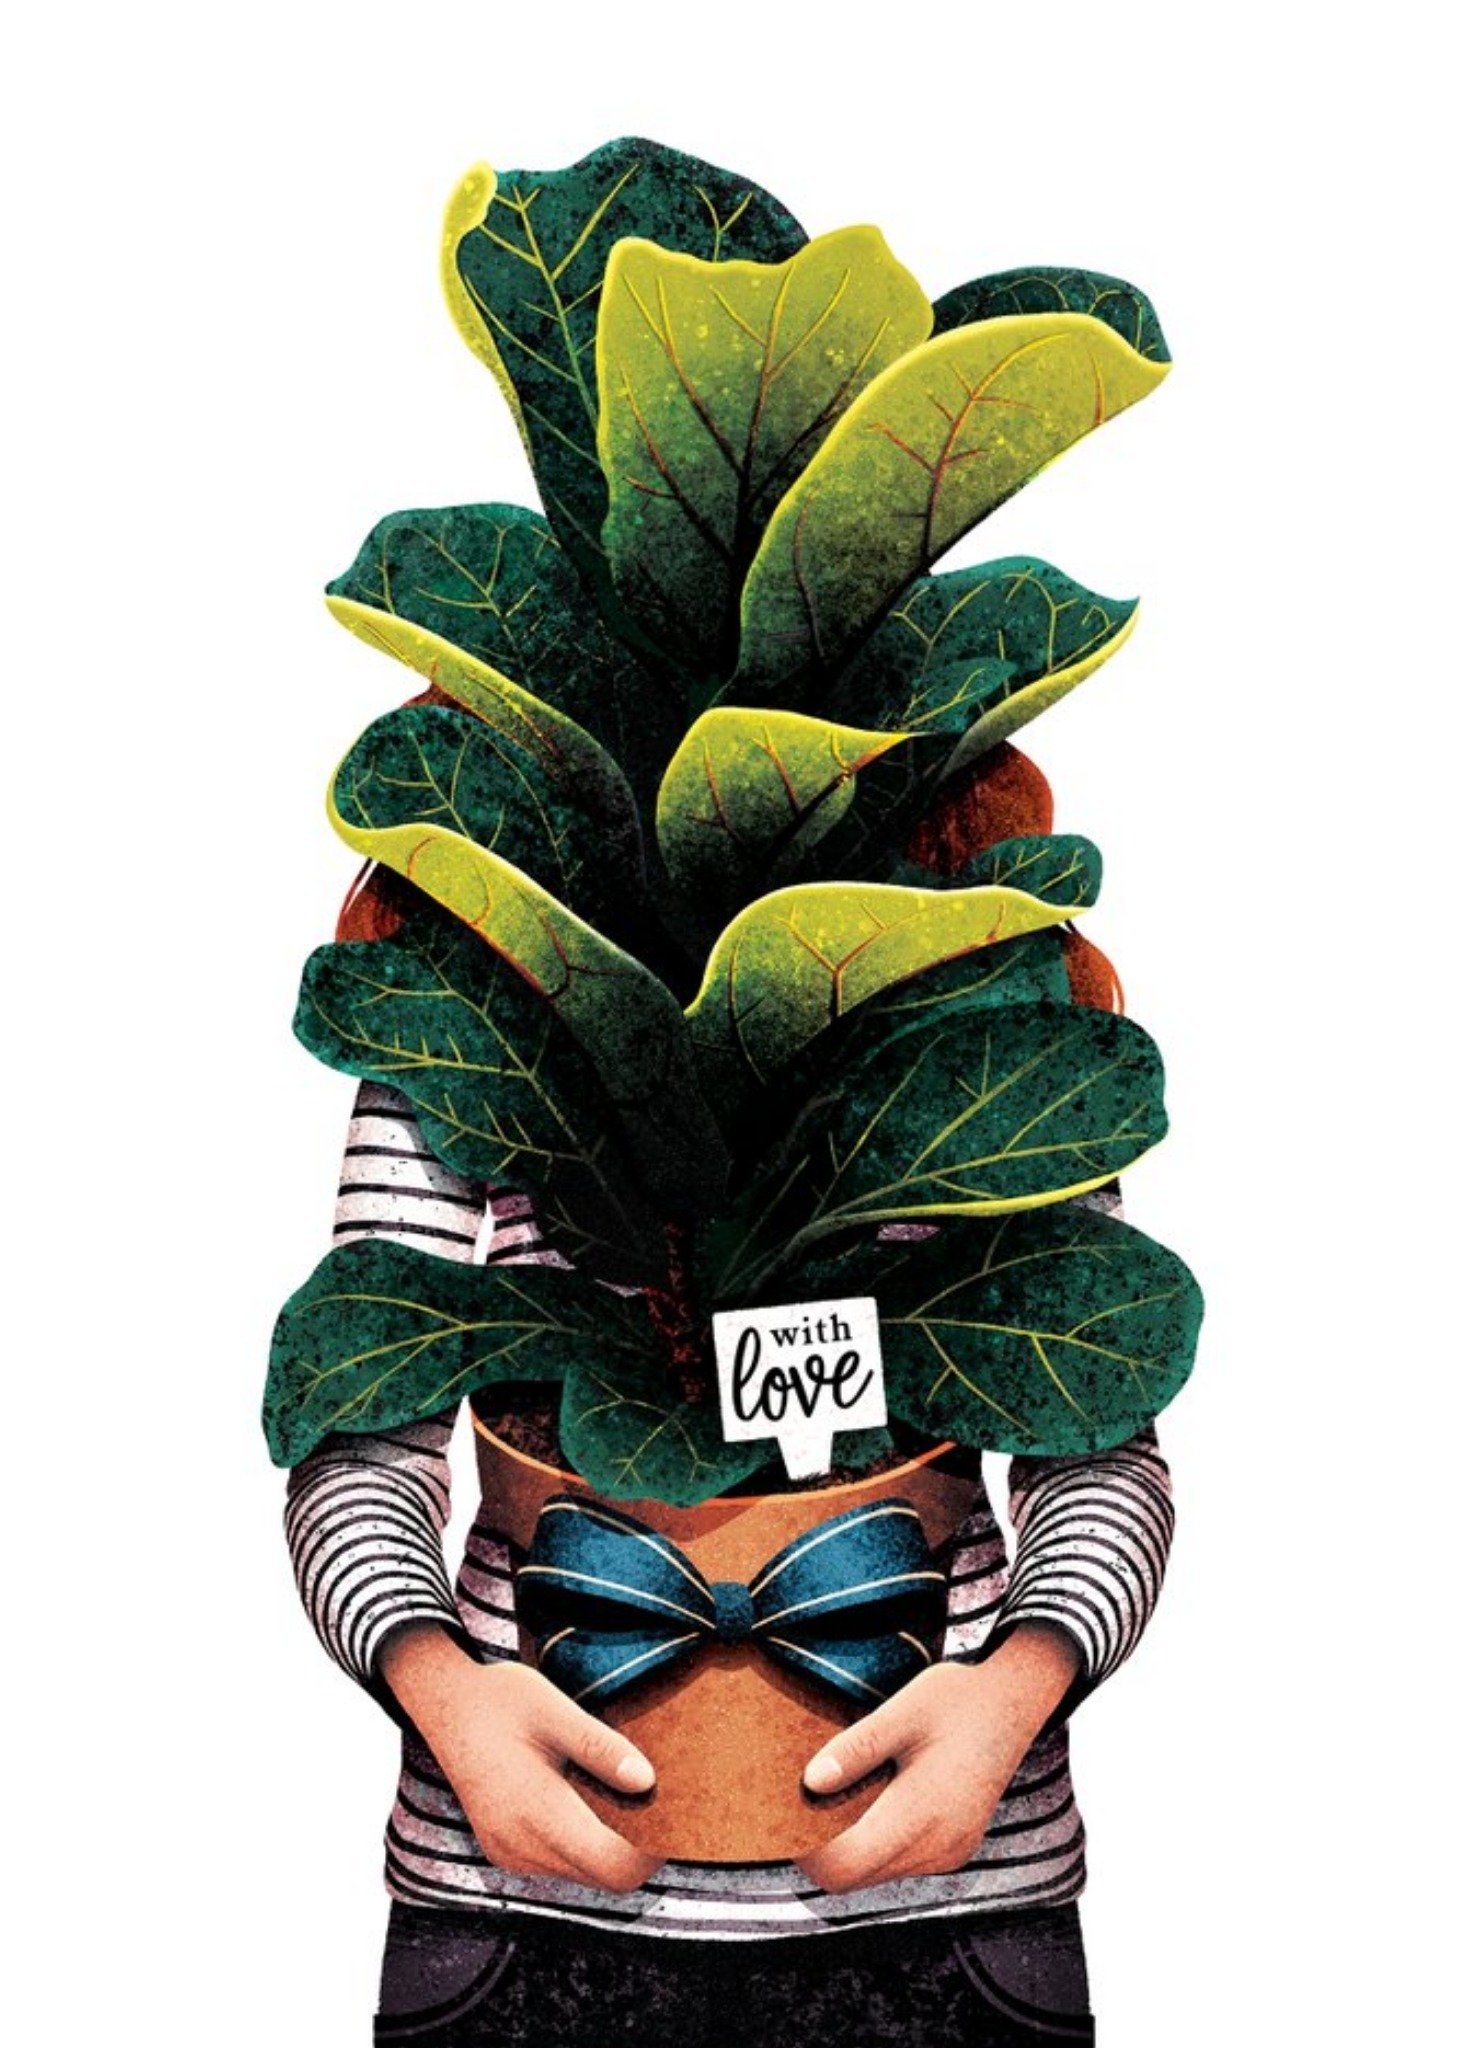 Moonpig Illustrated Person Carrying A Huge Potted Plant With A Tag That Reads With Love, Large Card